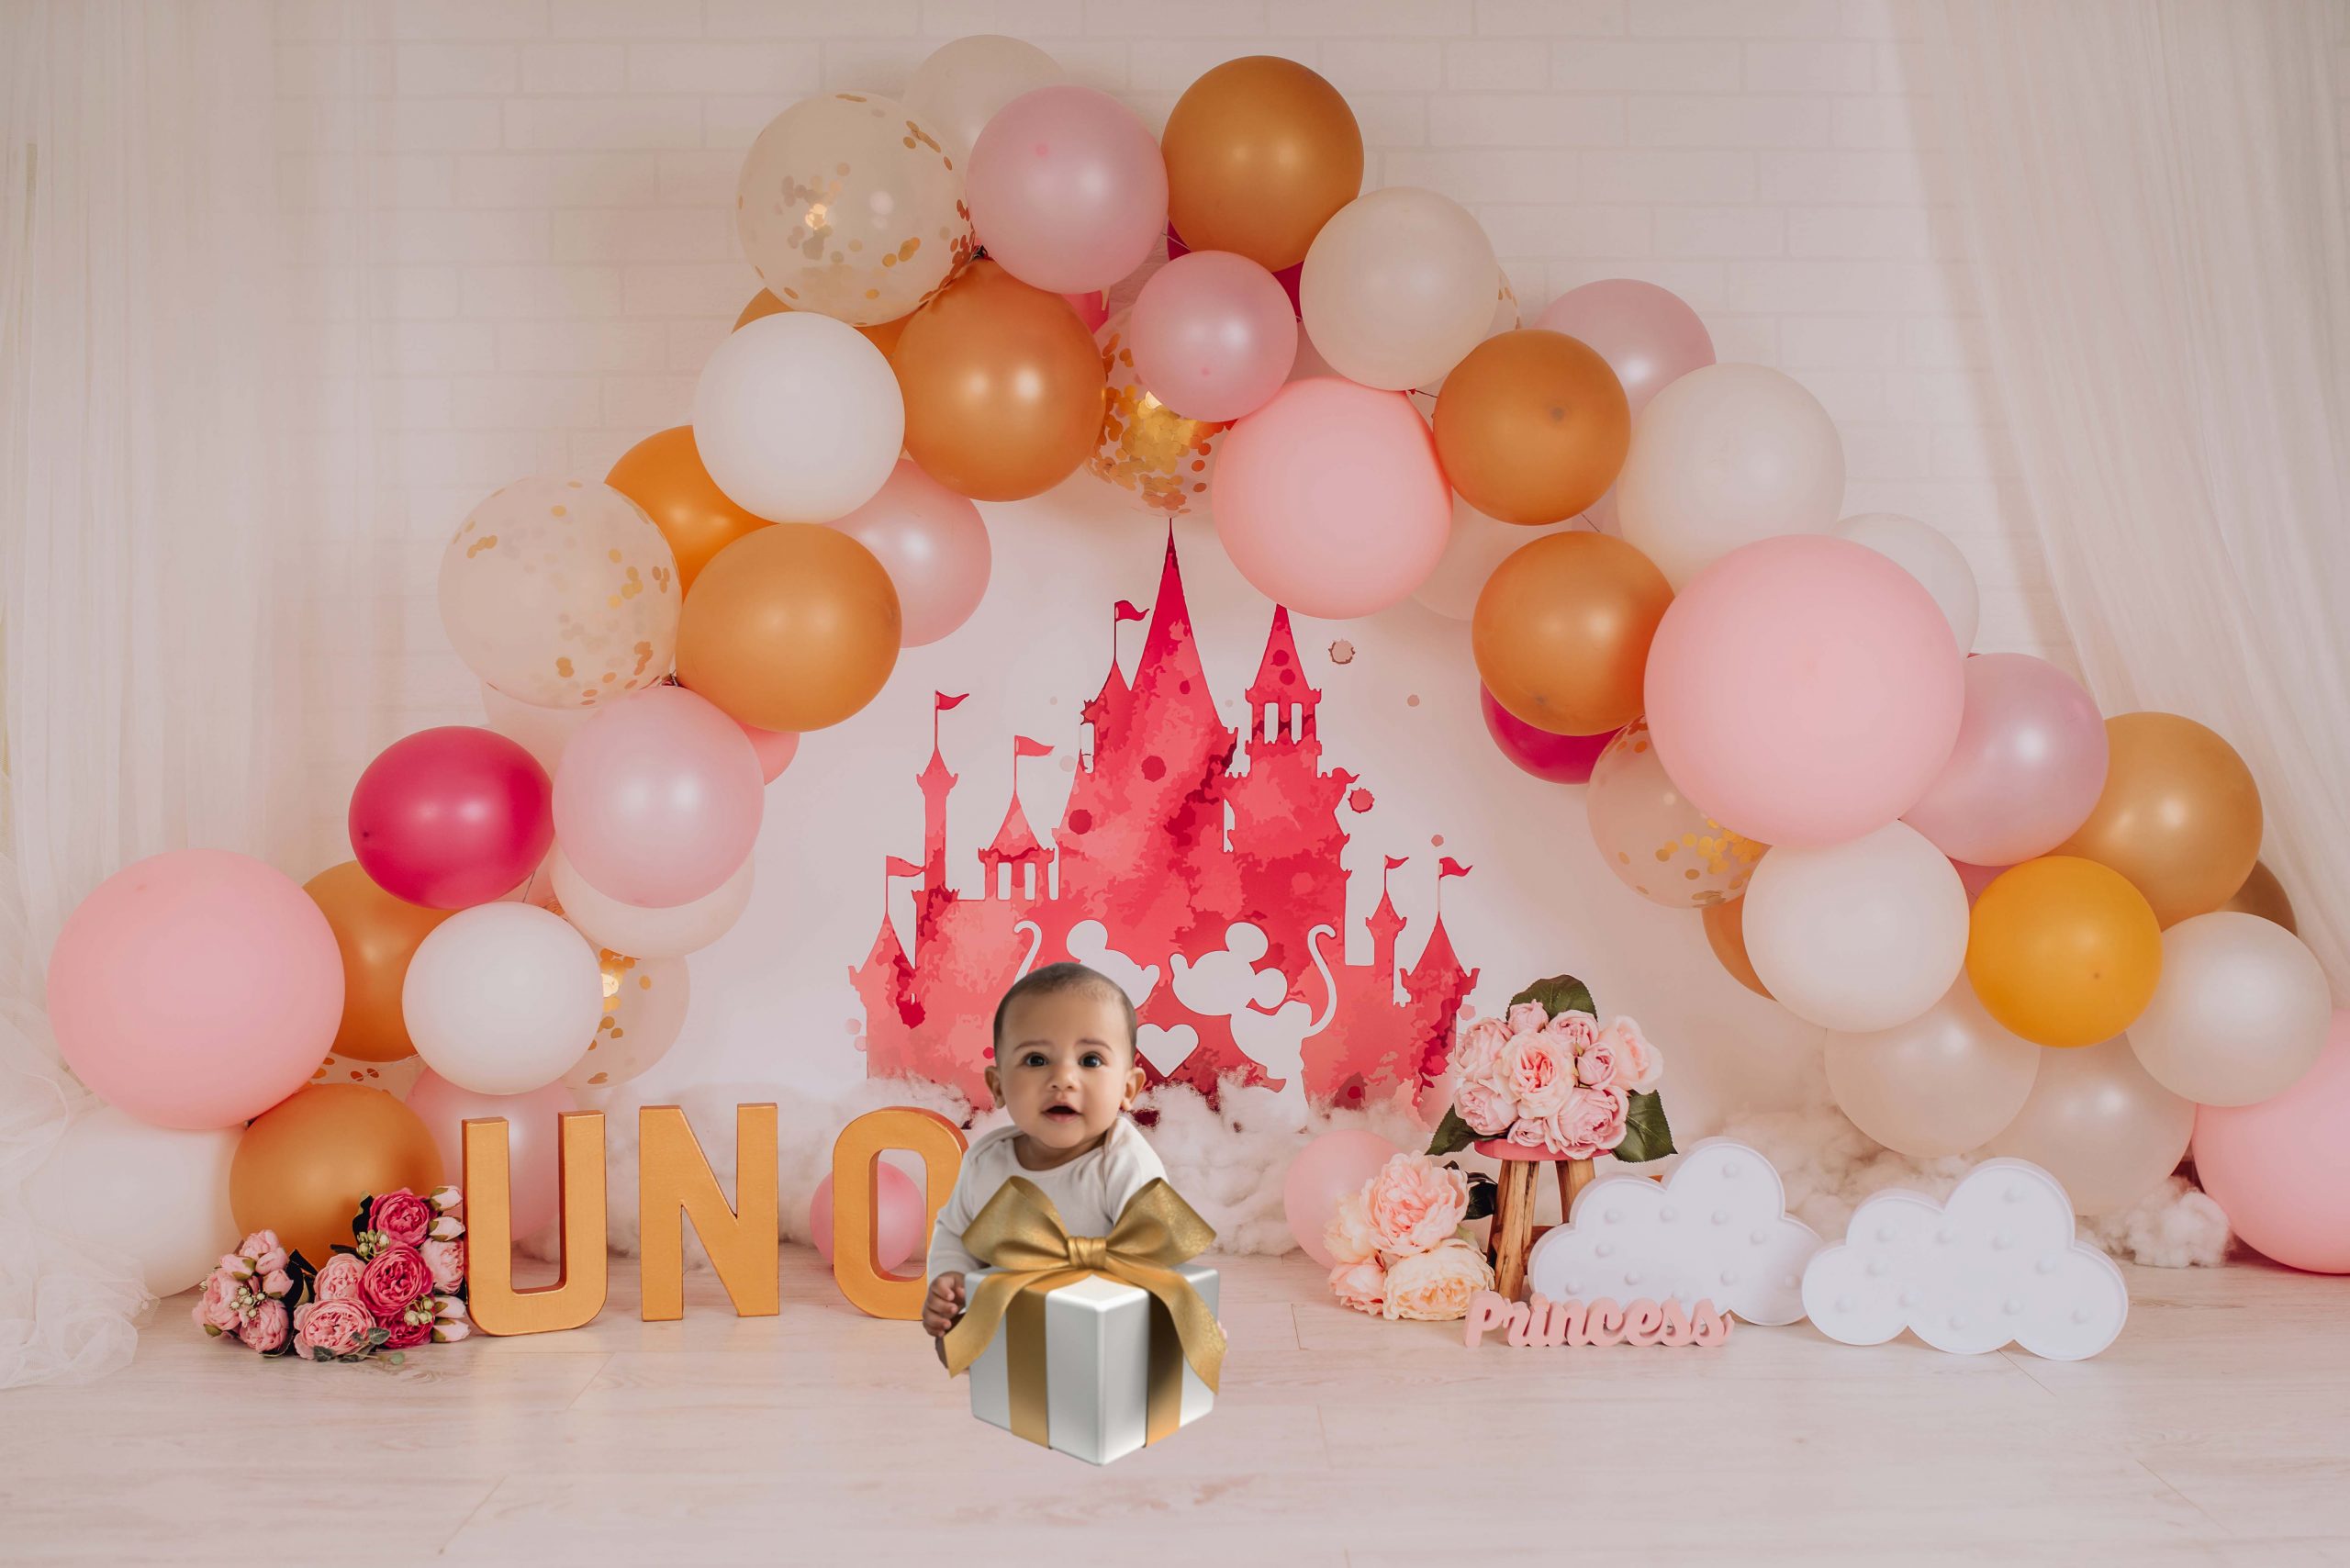 Baby's First Birthday Party Ideas - I See Me! Blog